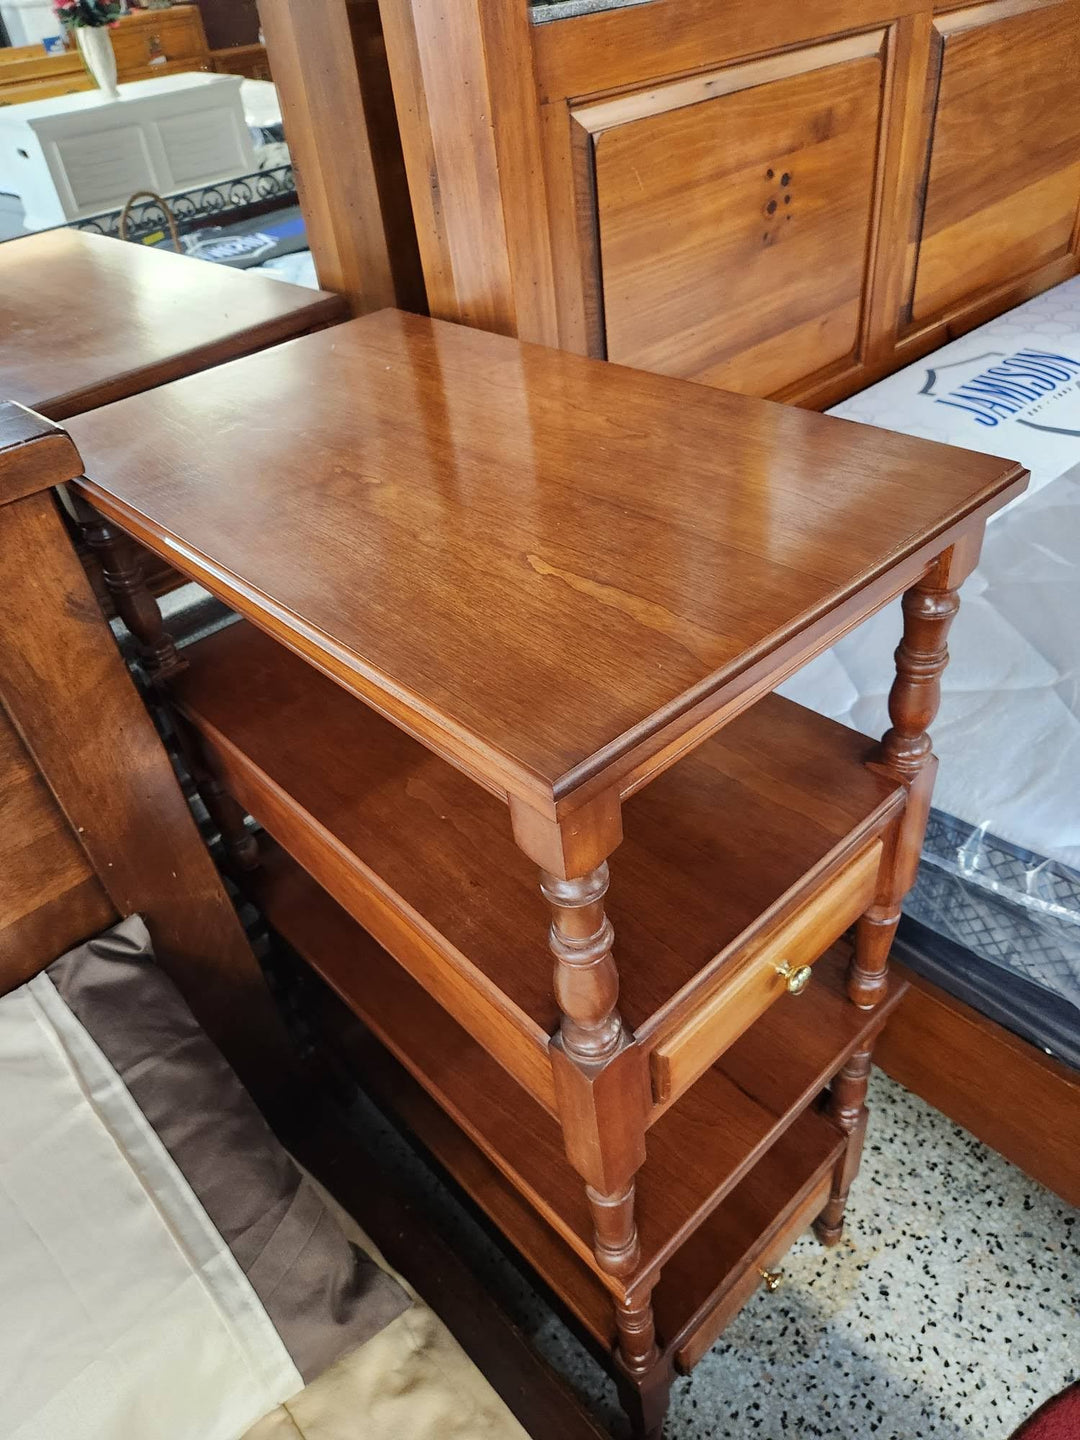 SET OF 2 - Cherry End Table